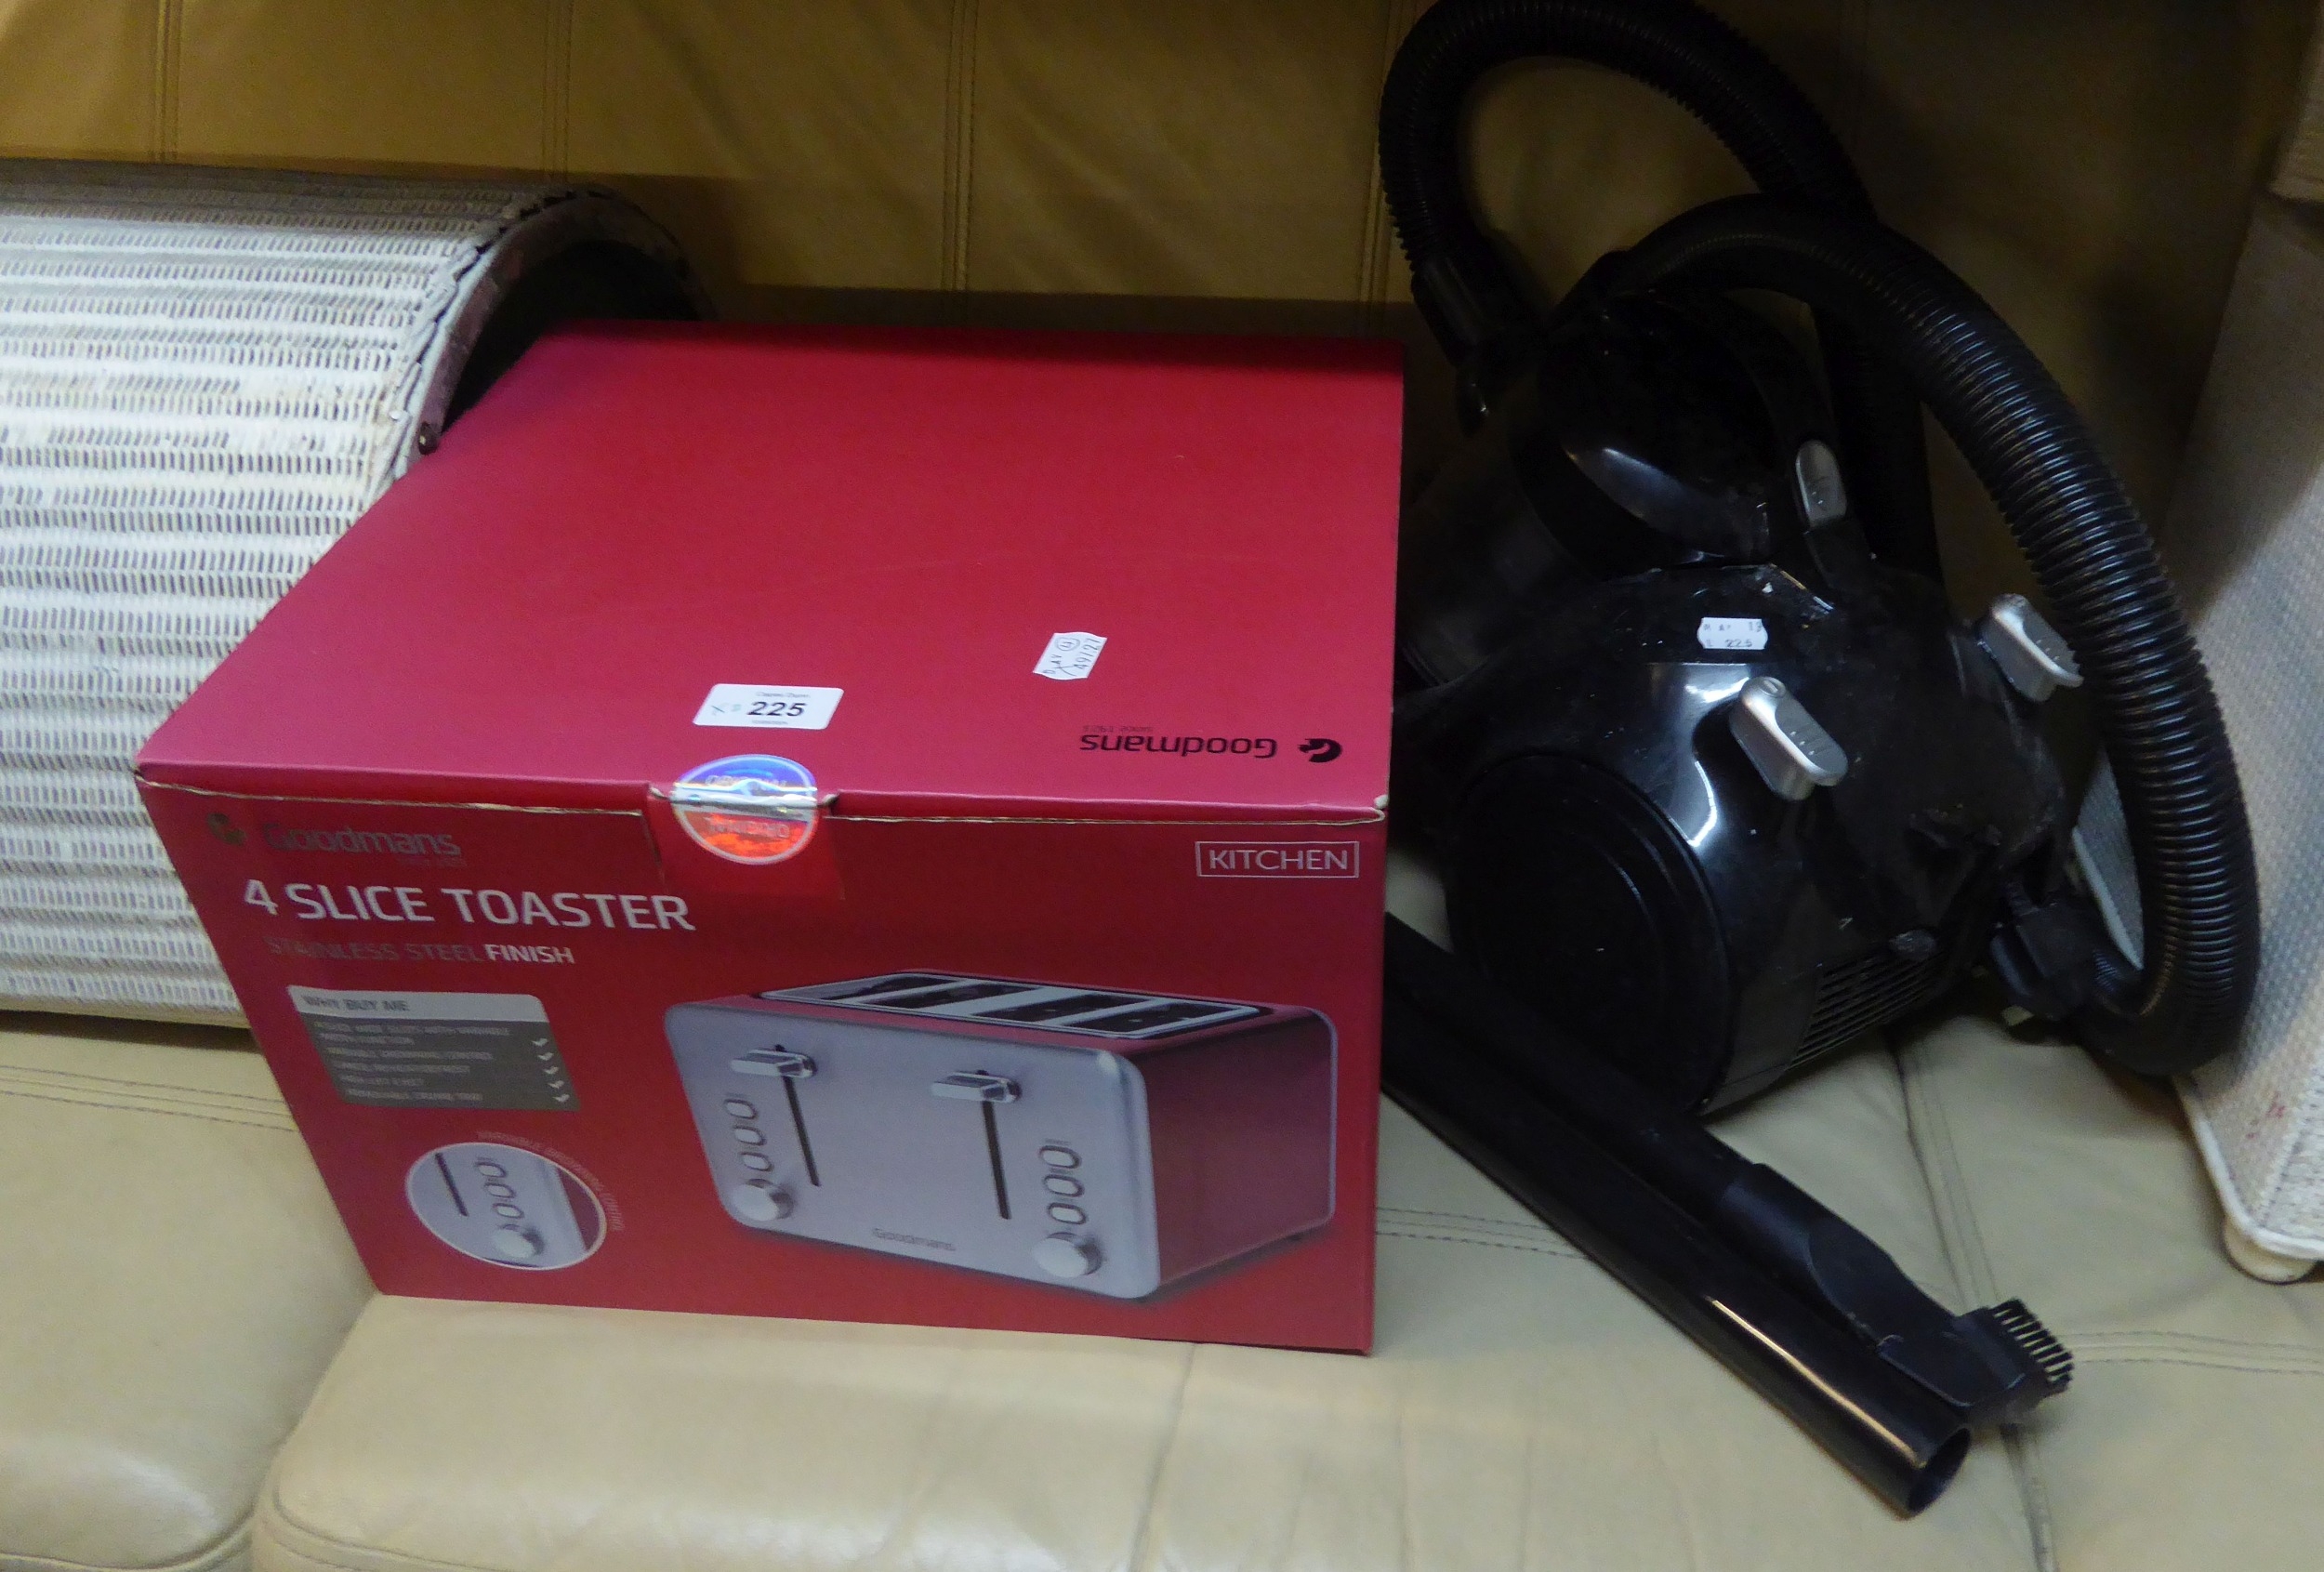 A VAX VACUUM CLEANER AND A GOODMAN'S FOUR SLICE TOASTER (NEW, BOXED)